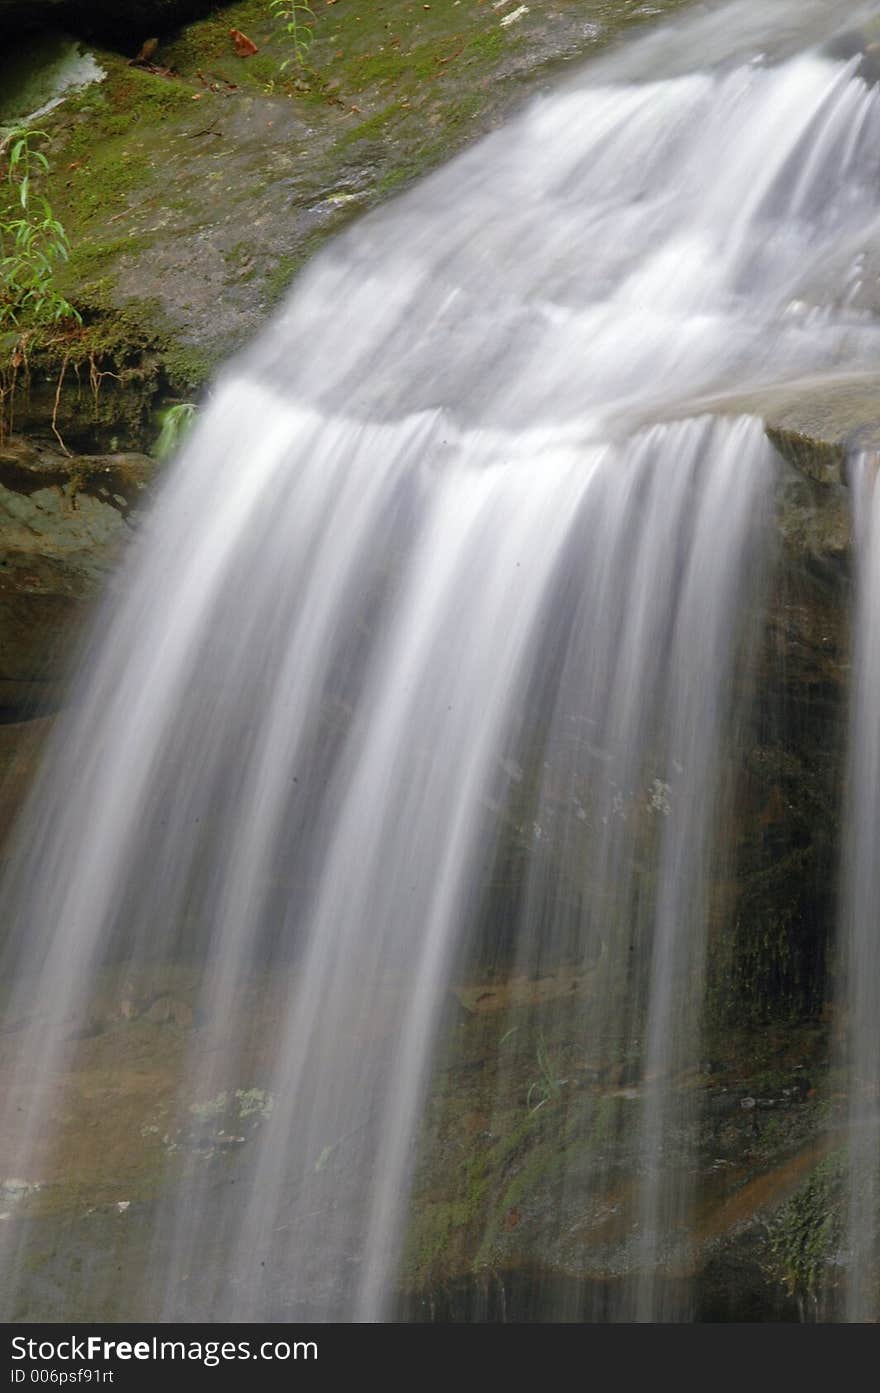 Partial image of a small waterfall.